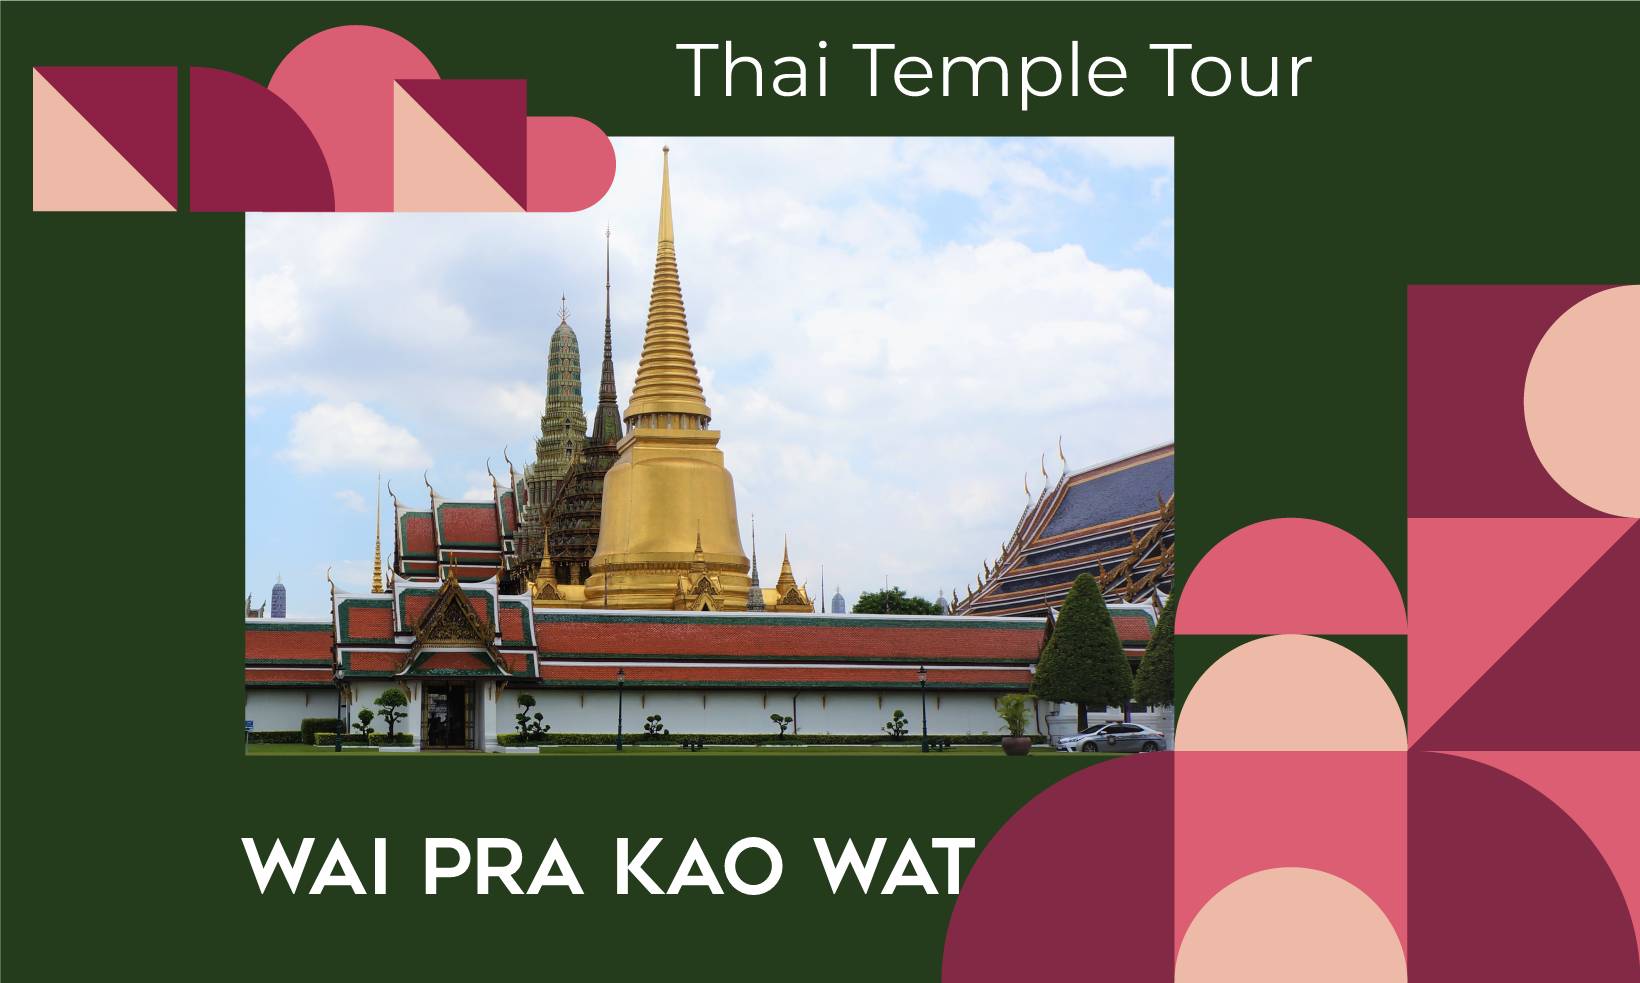 Must-visit Thai 9 temples tour during the new year